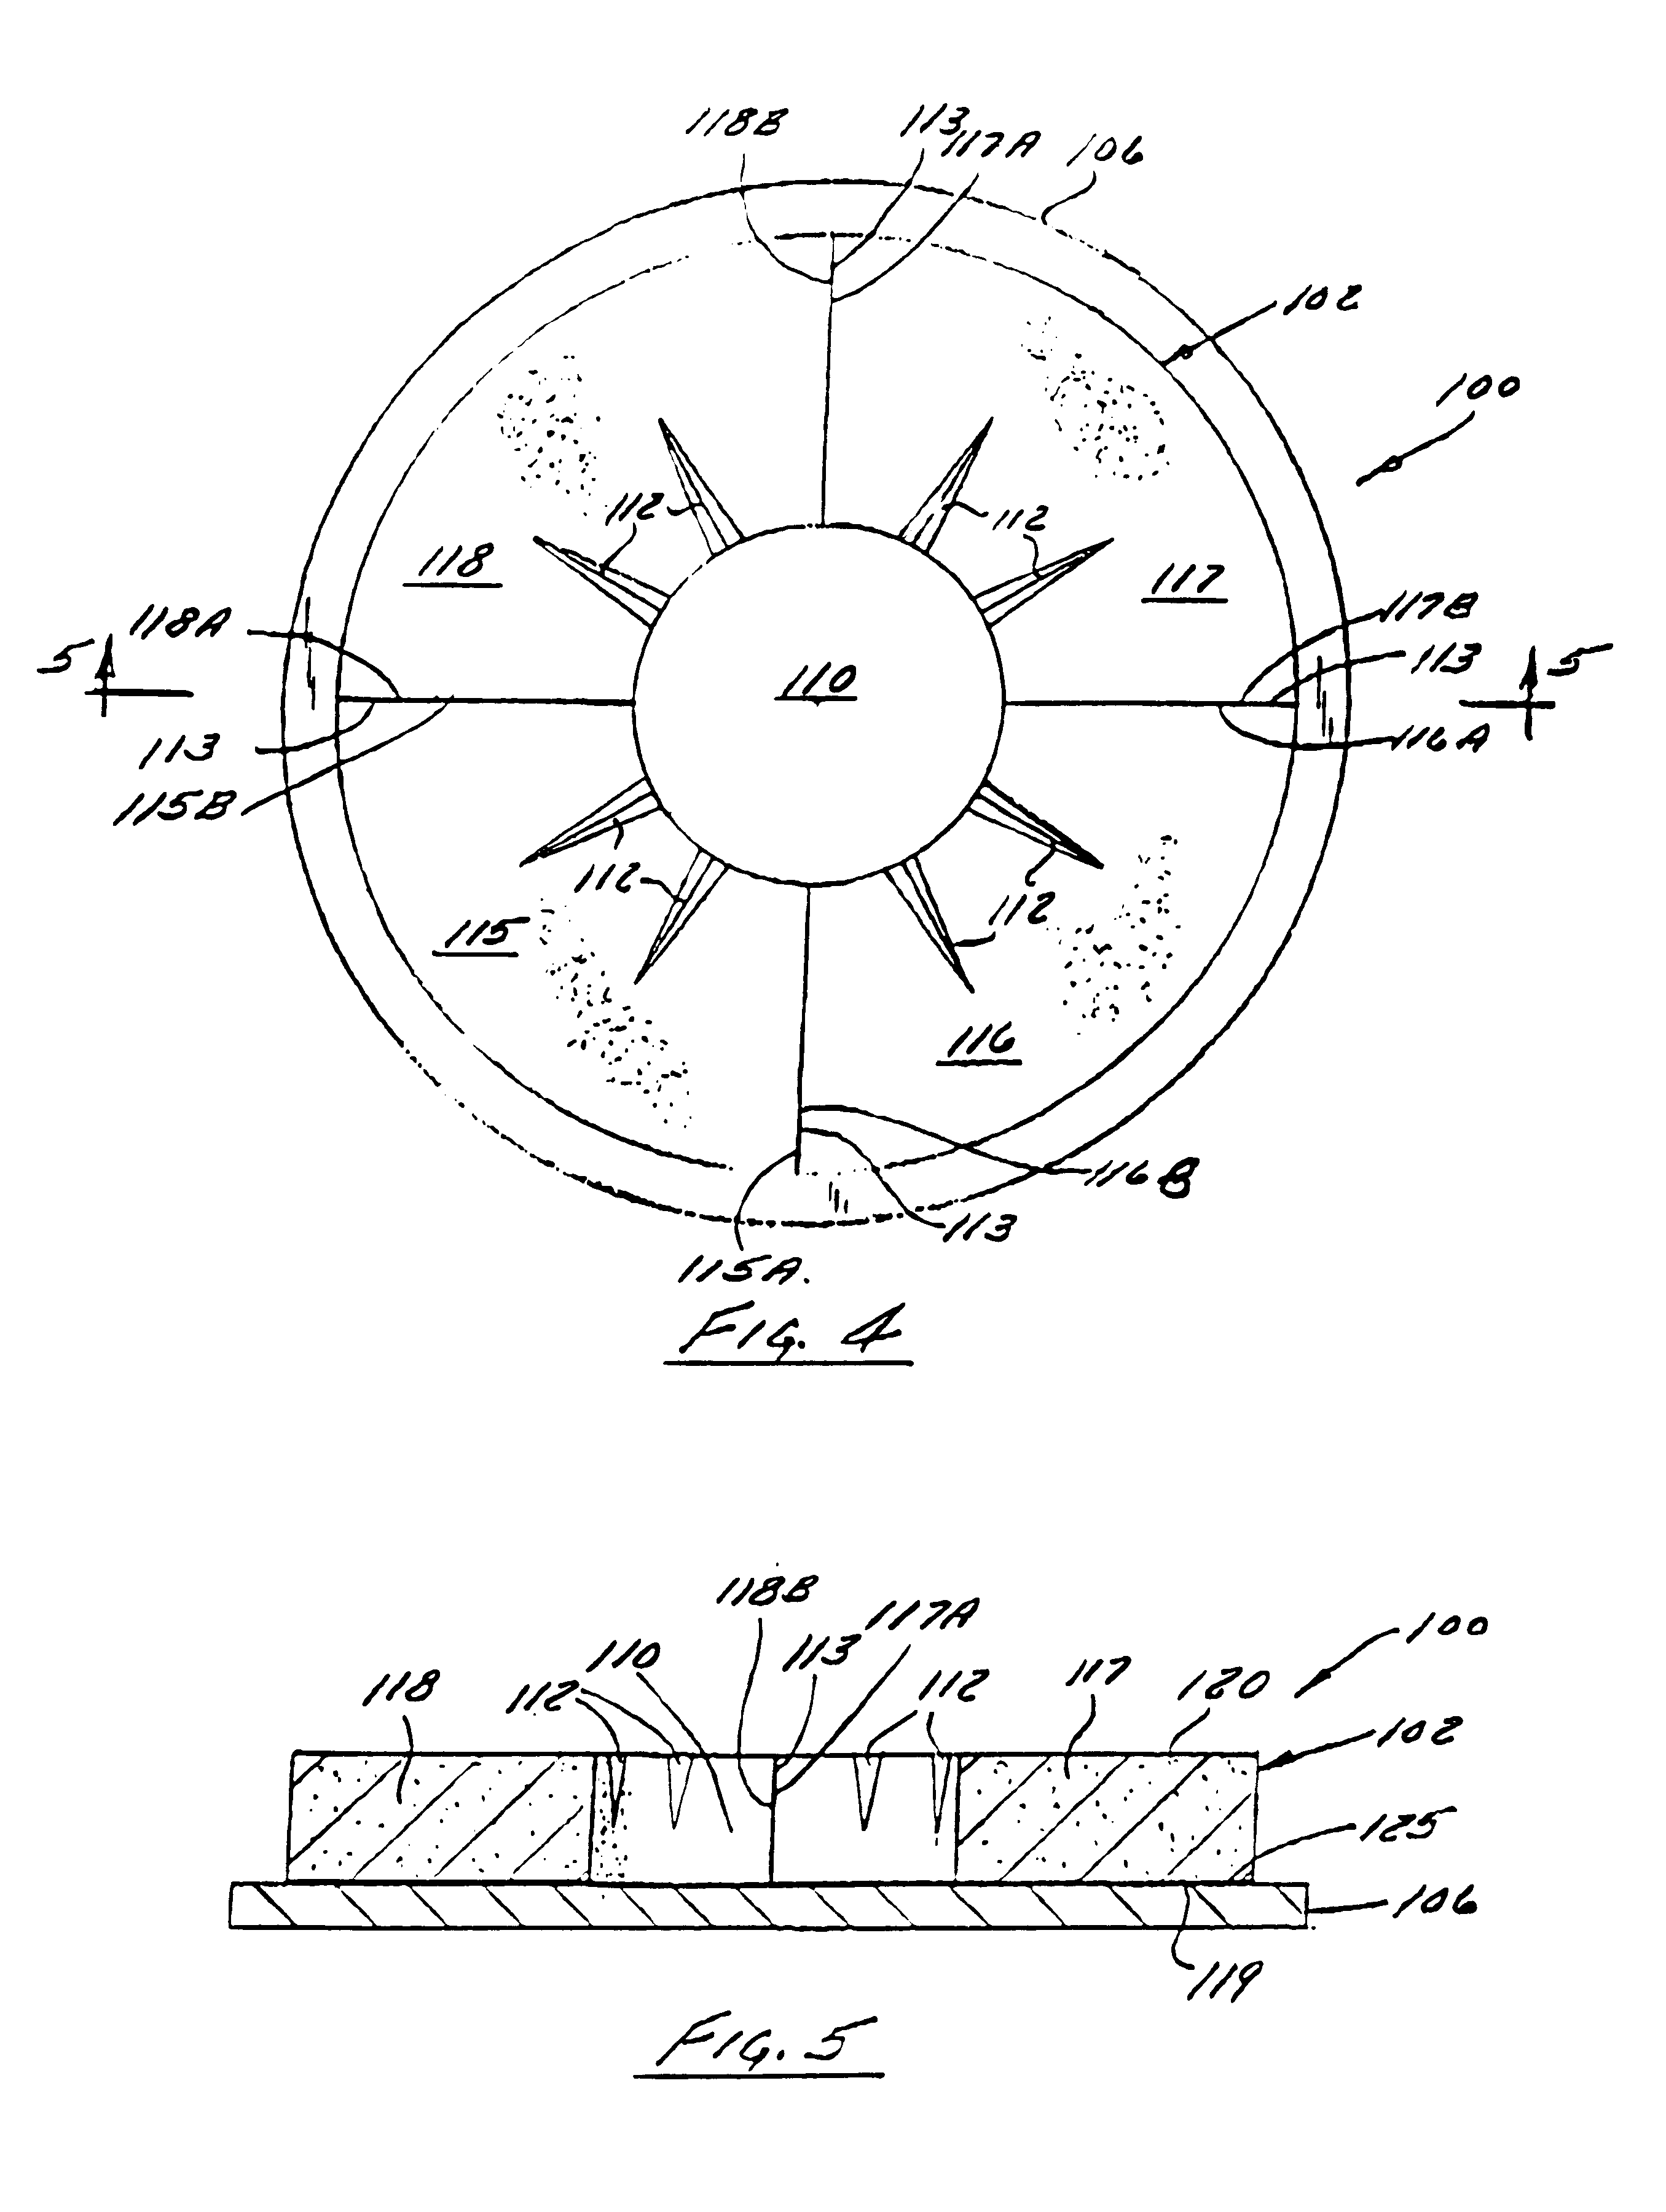 Grinding devices for rubber comminuting machines